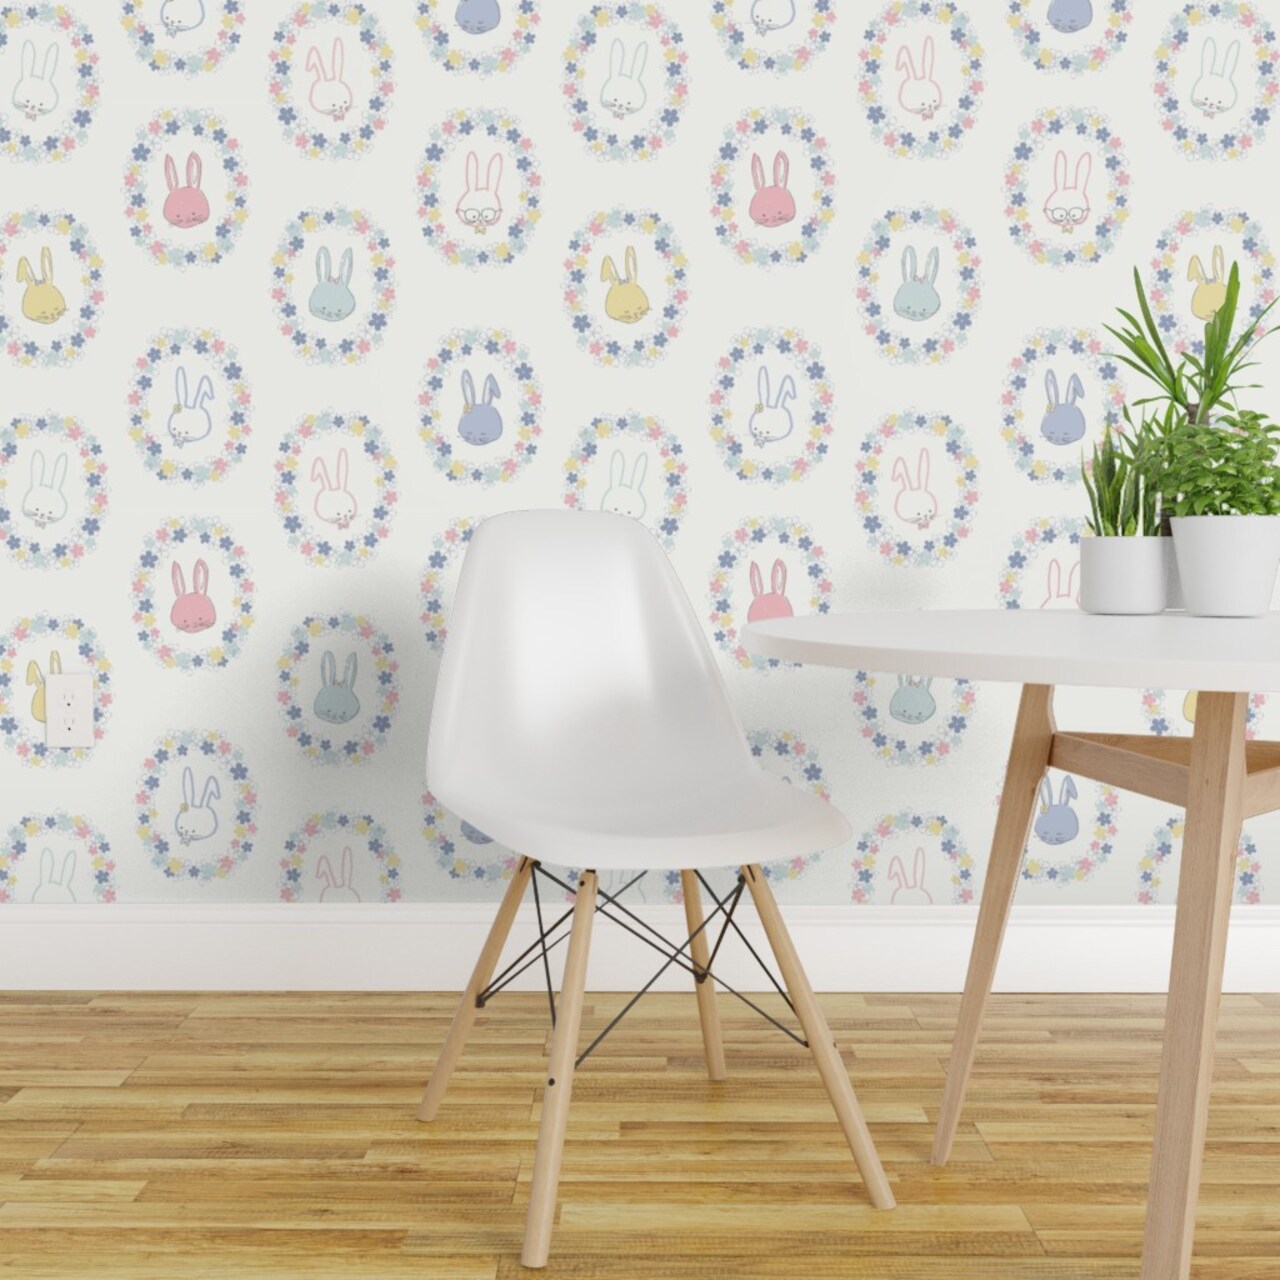 Peel &#x26; Stick Wallpaper 2FT Wide Easter Bunnies Pastel Floral Spring Flowers Periwinkle Lilac Blue Pink Ivory Garden Hand Drawn Whimsical Rabbits Custom Removable Wallpaper by Spoonflower